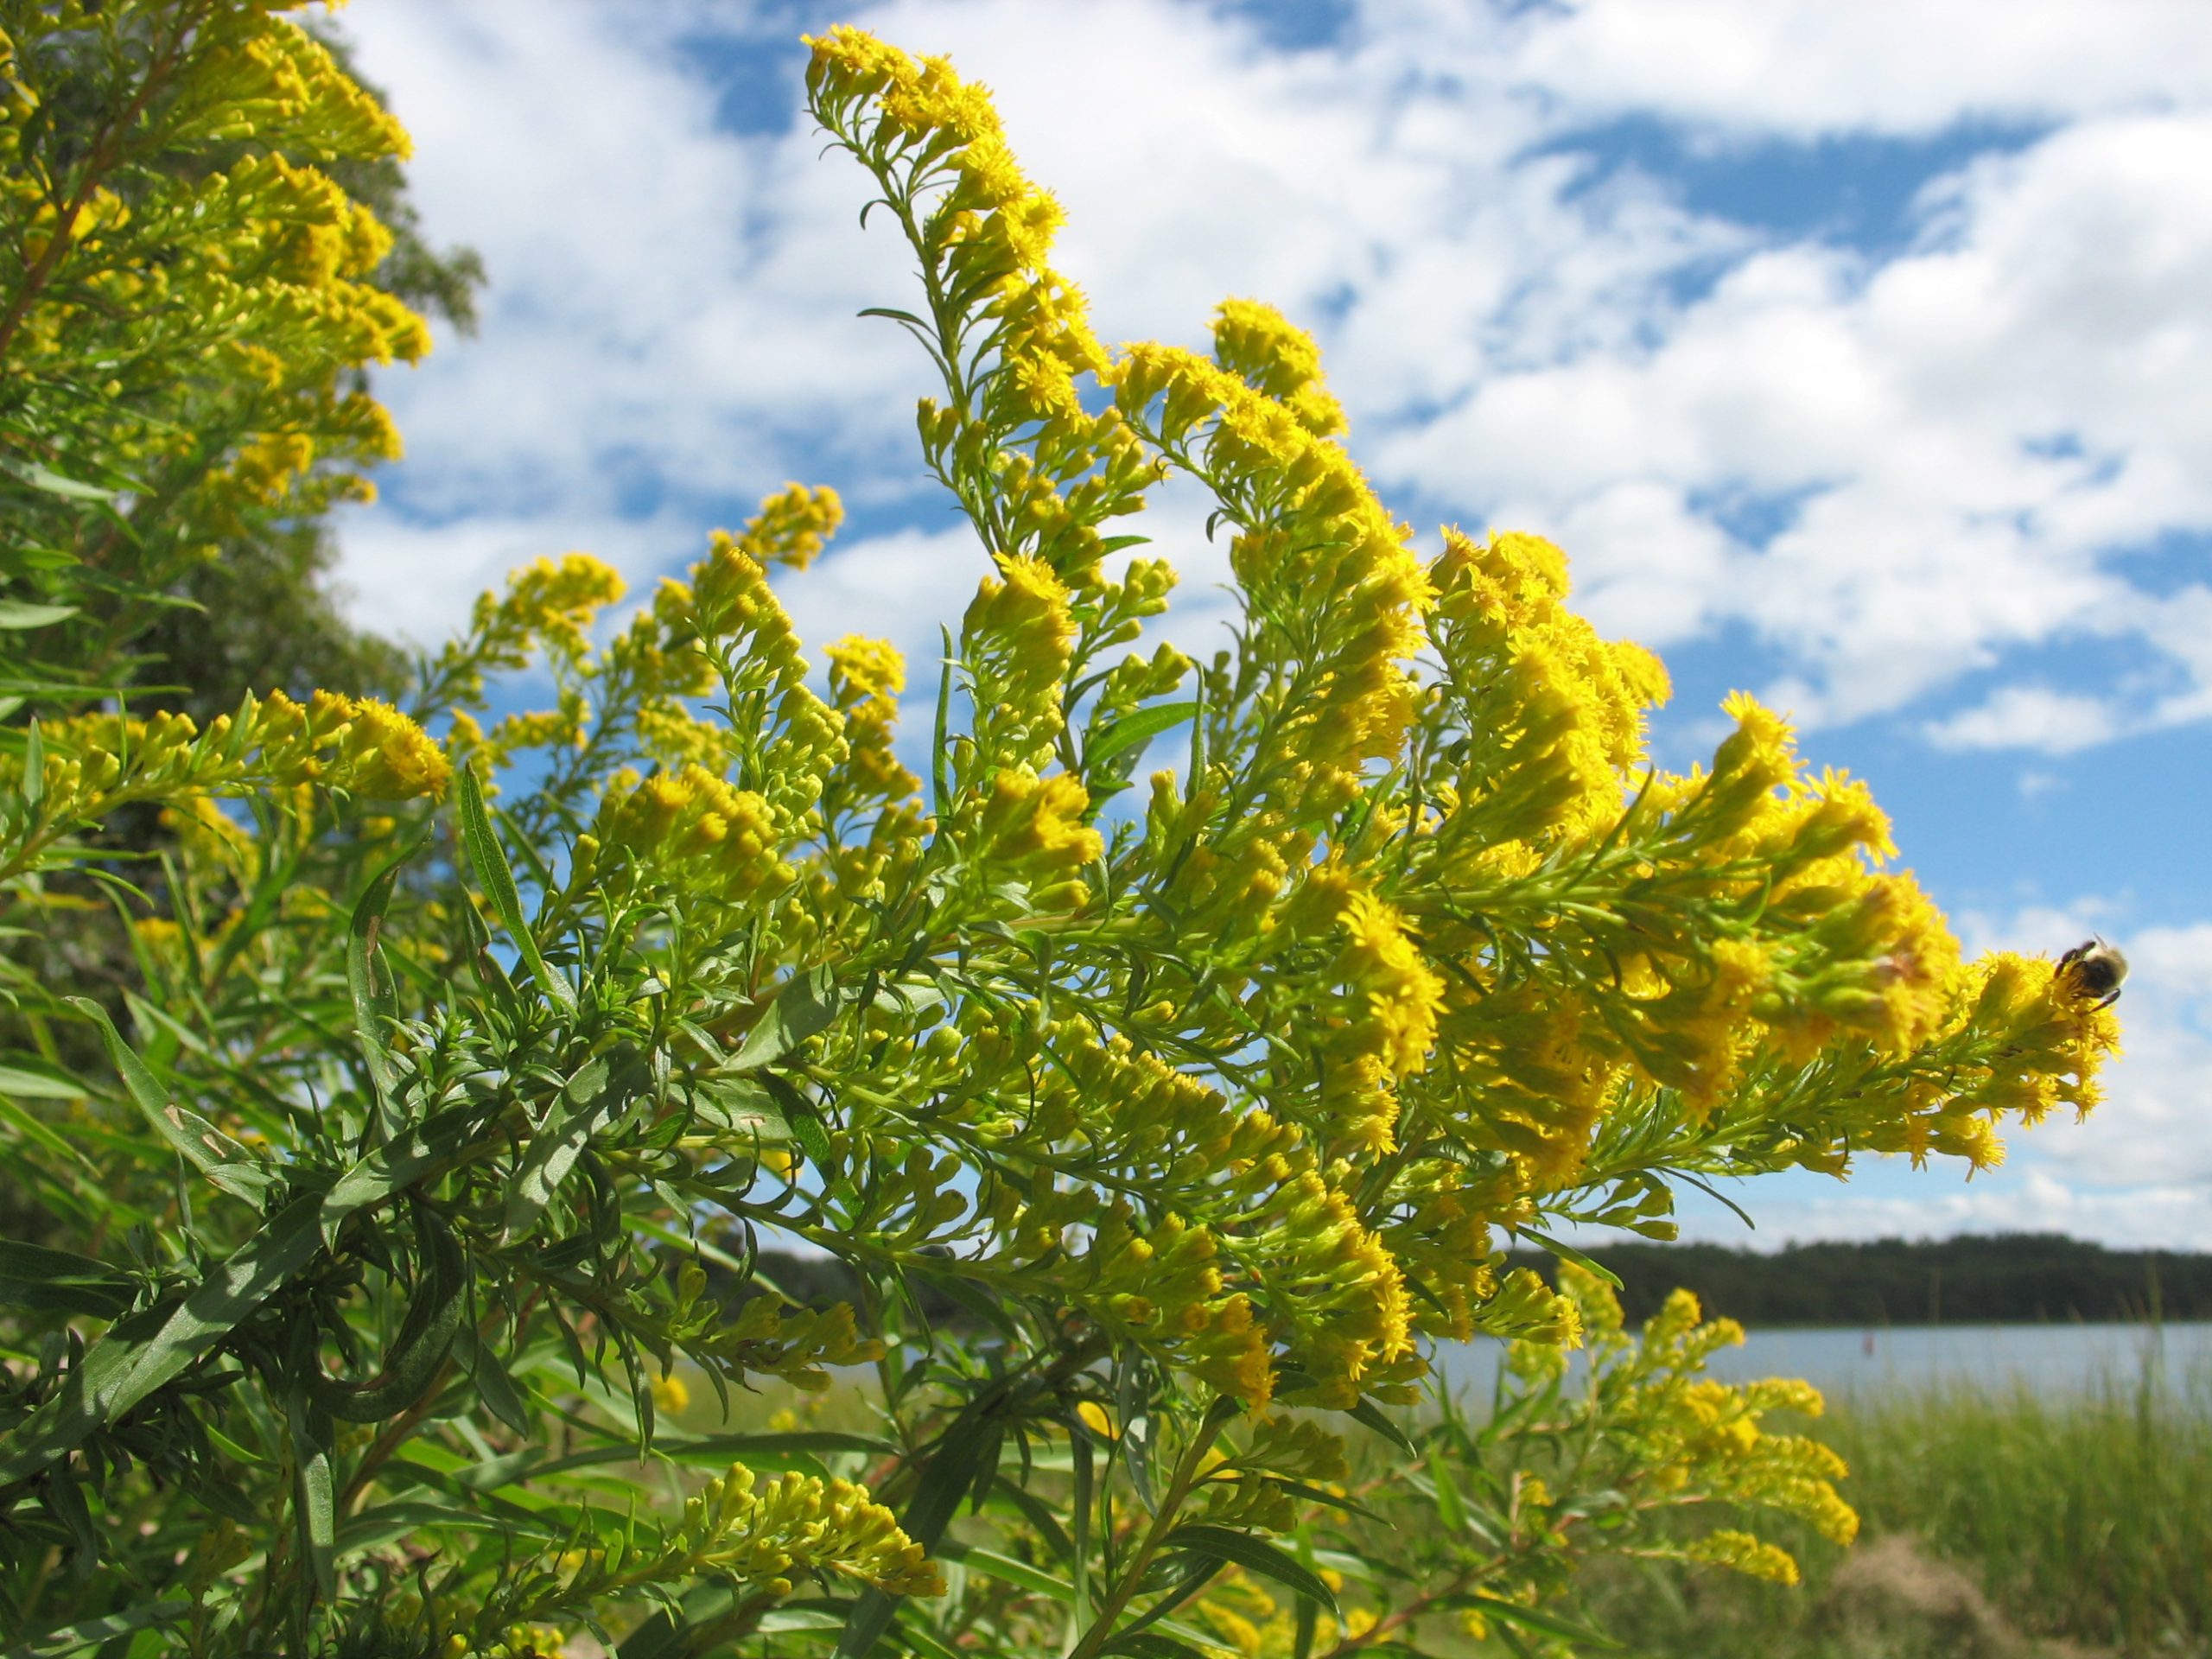 Goldenrod by Little Buttermilk Bay (user submitted)